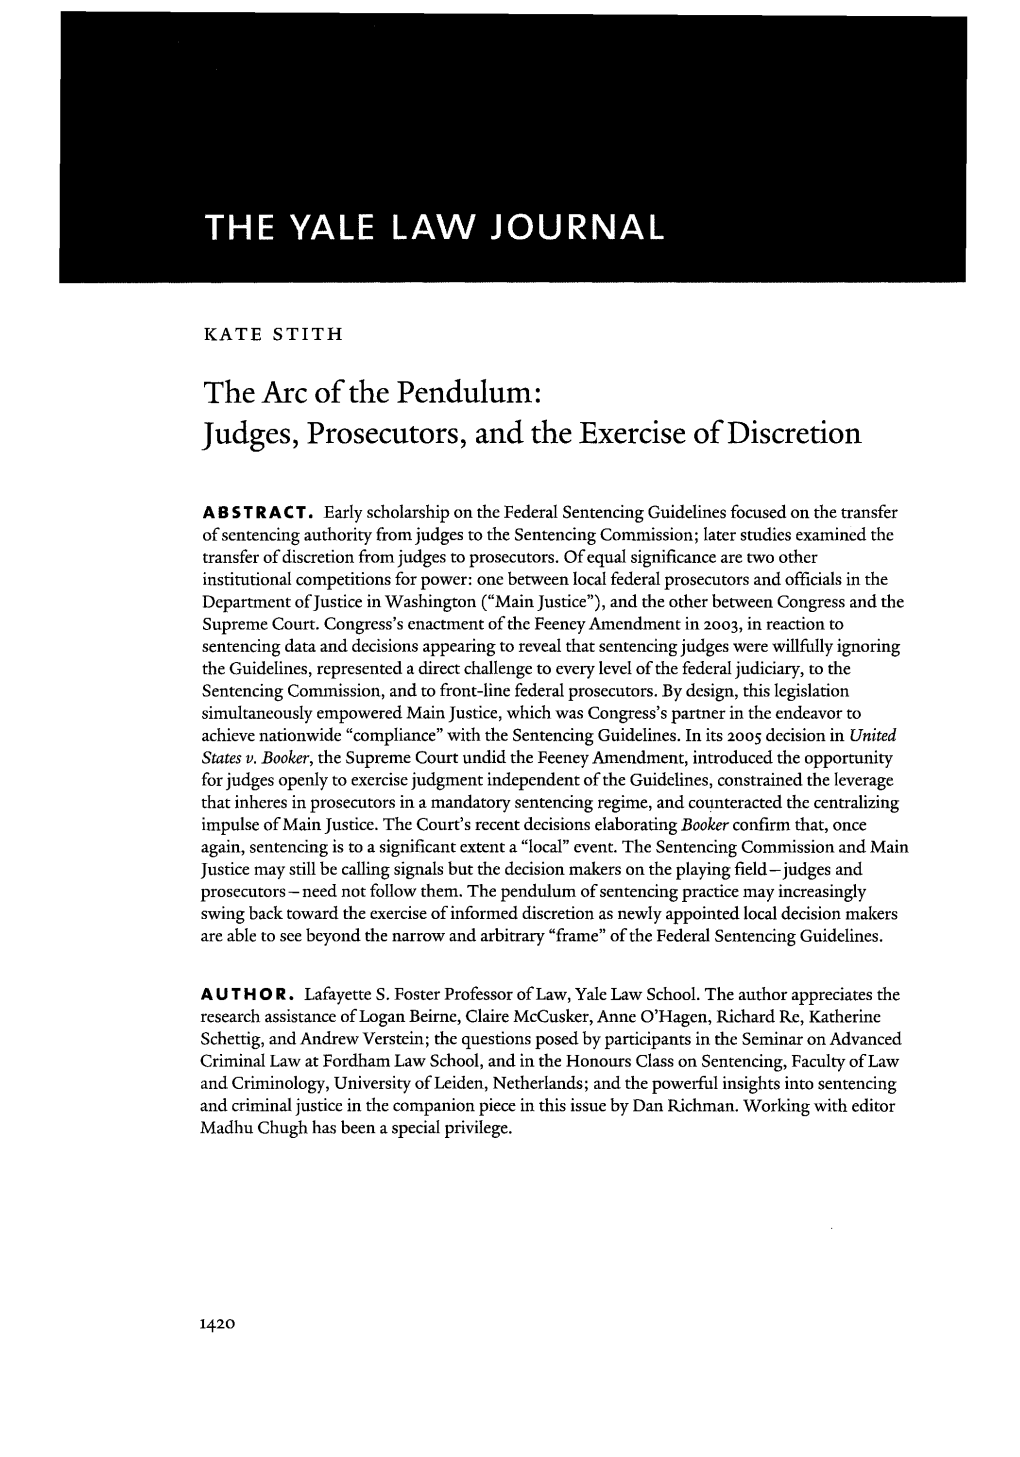 Judges, Prosecutors, and the Exercise of Discretion